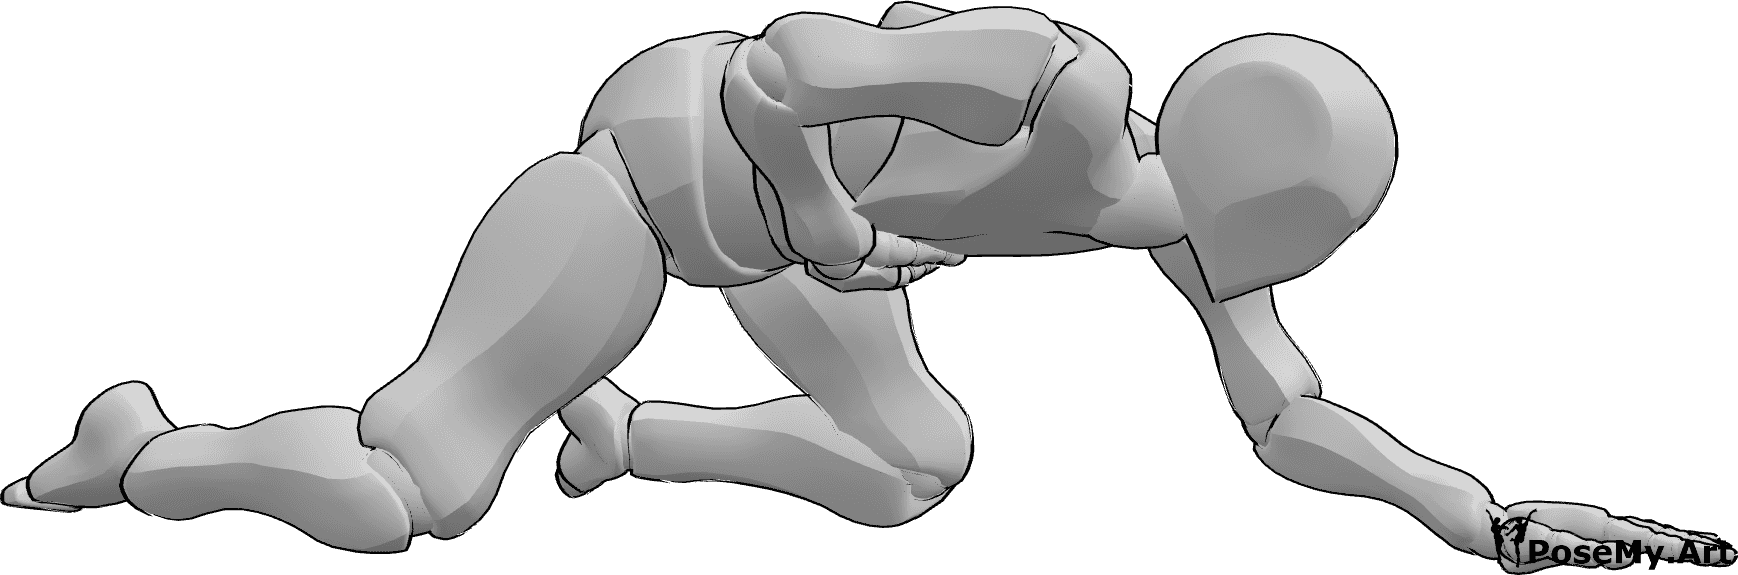 Pose Reference- Injured crawling pose - Injured male is holding his stomach and crawling on his knees